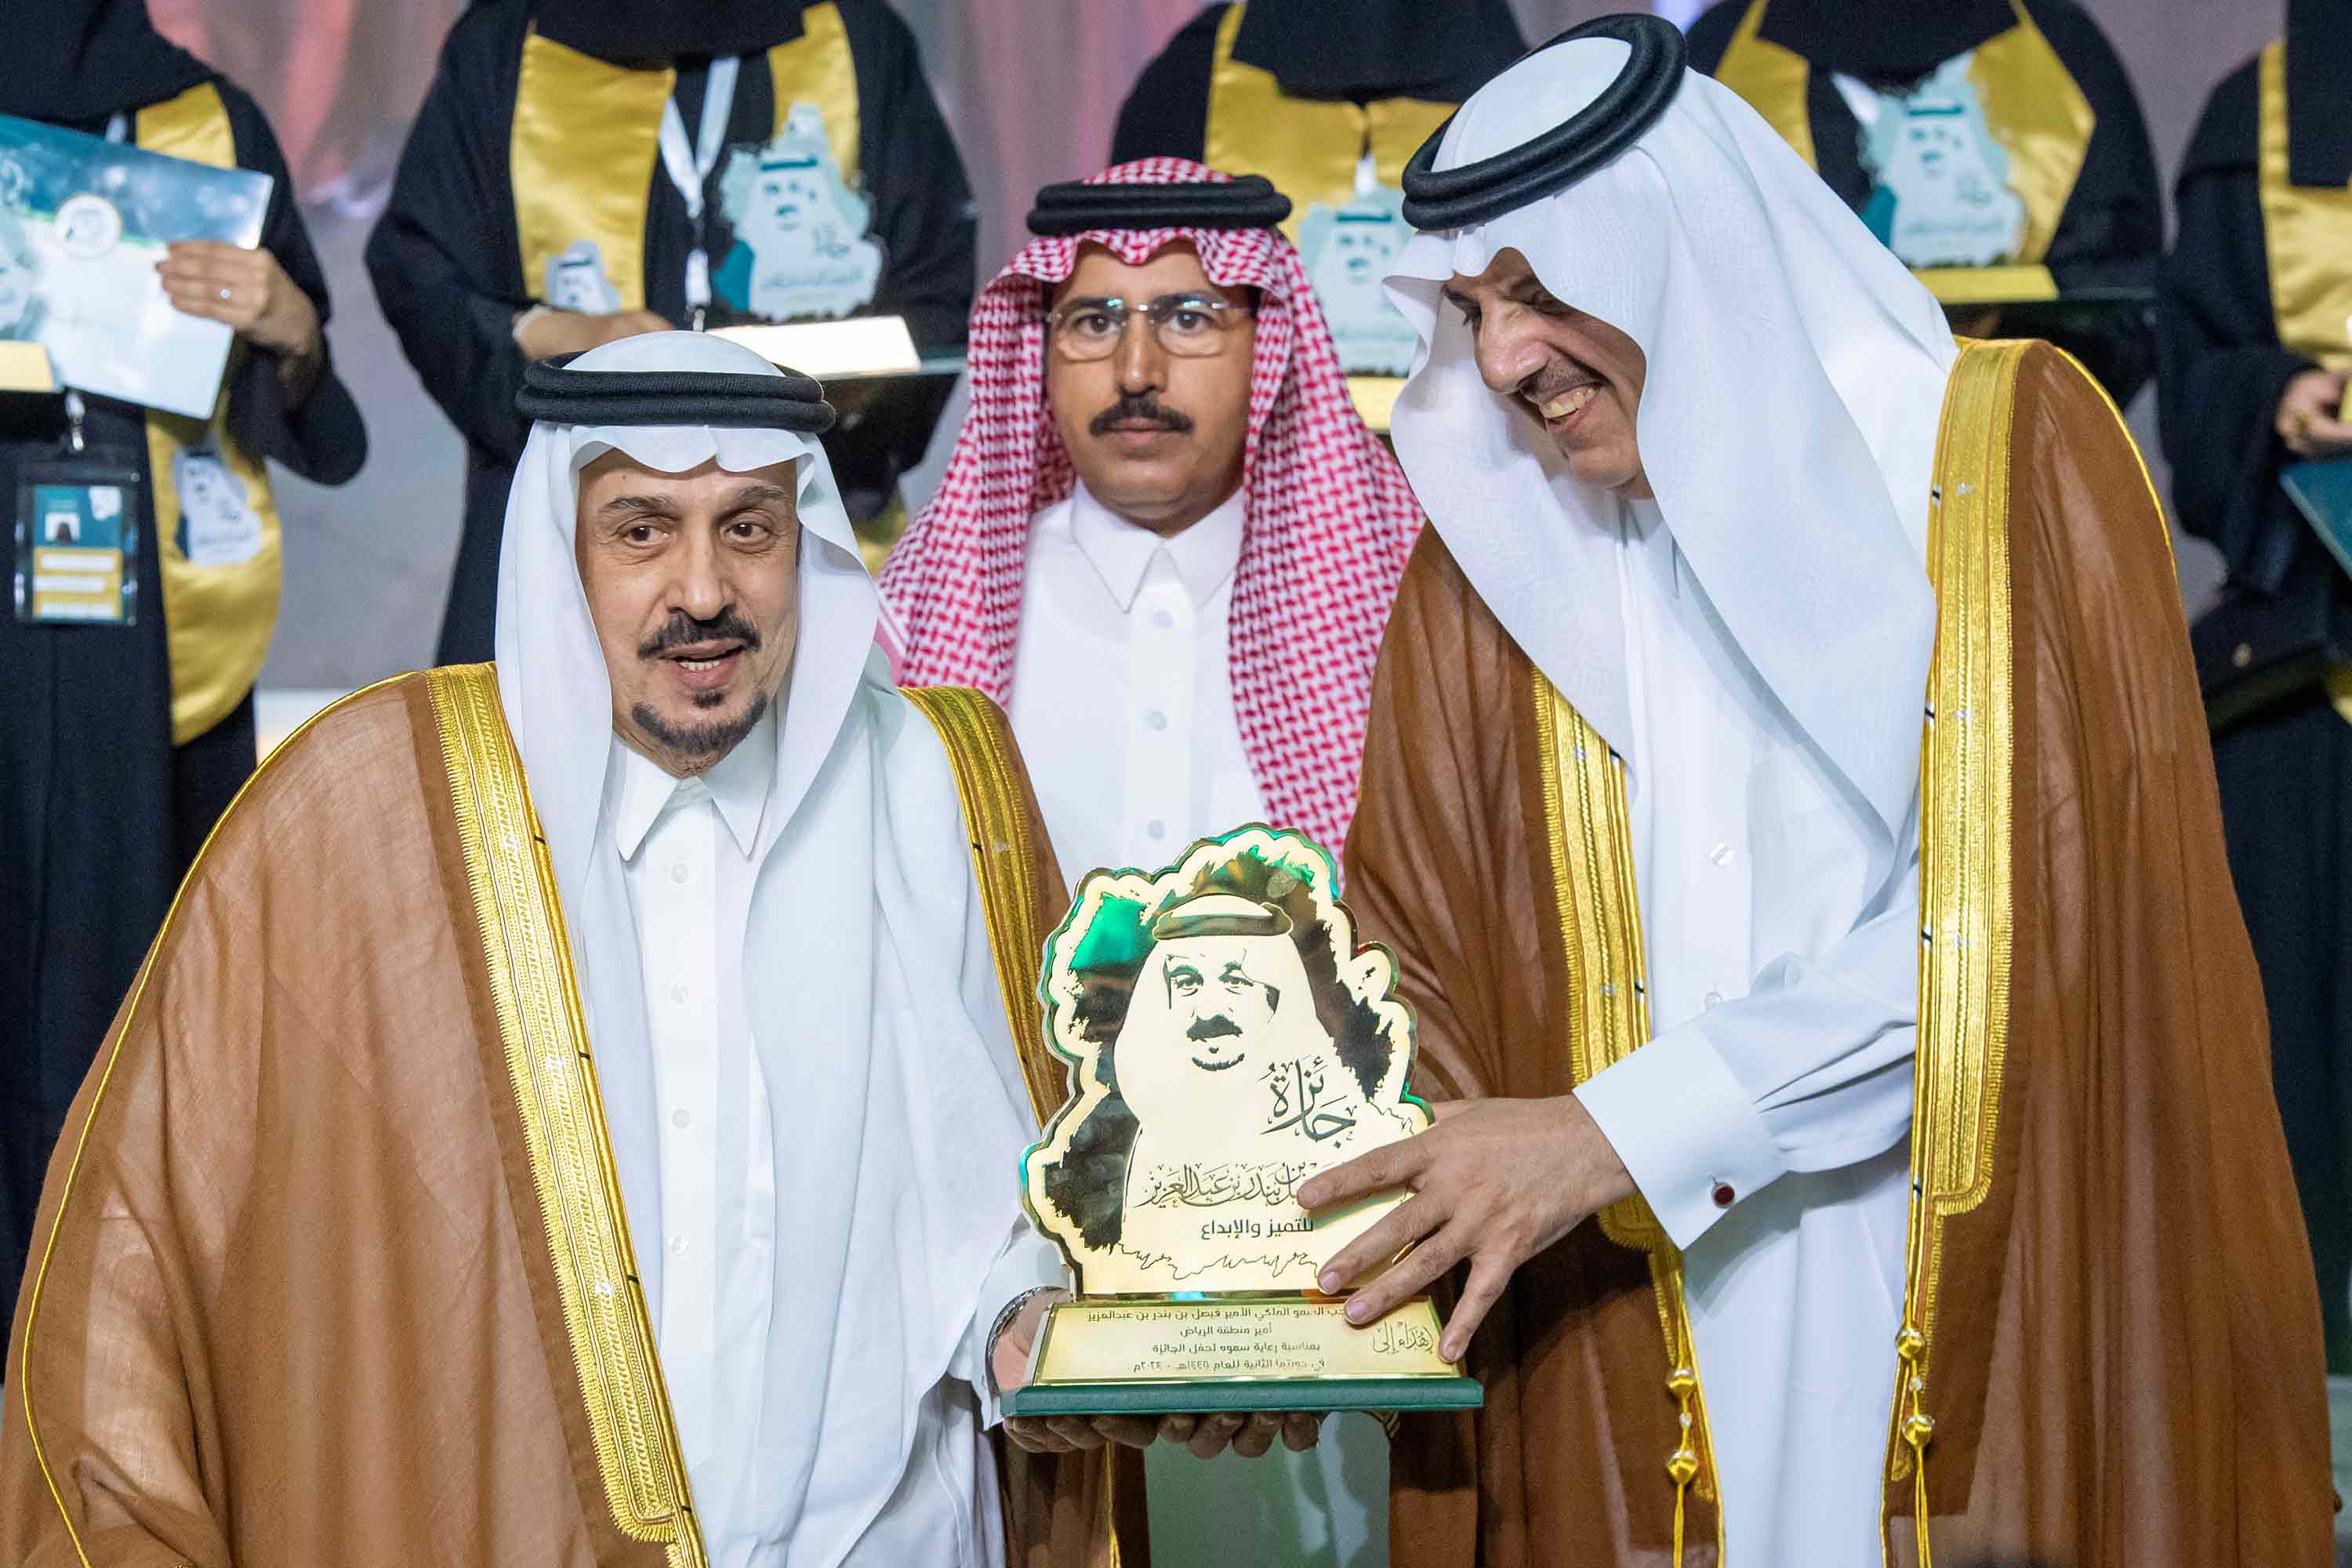 His Highness the Governor of Riyadh Region sponsors the ceremony of honoring the winners of His Highness Award for Excellence and Creativity in its second session at the university.